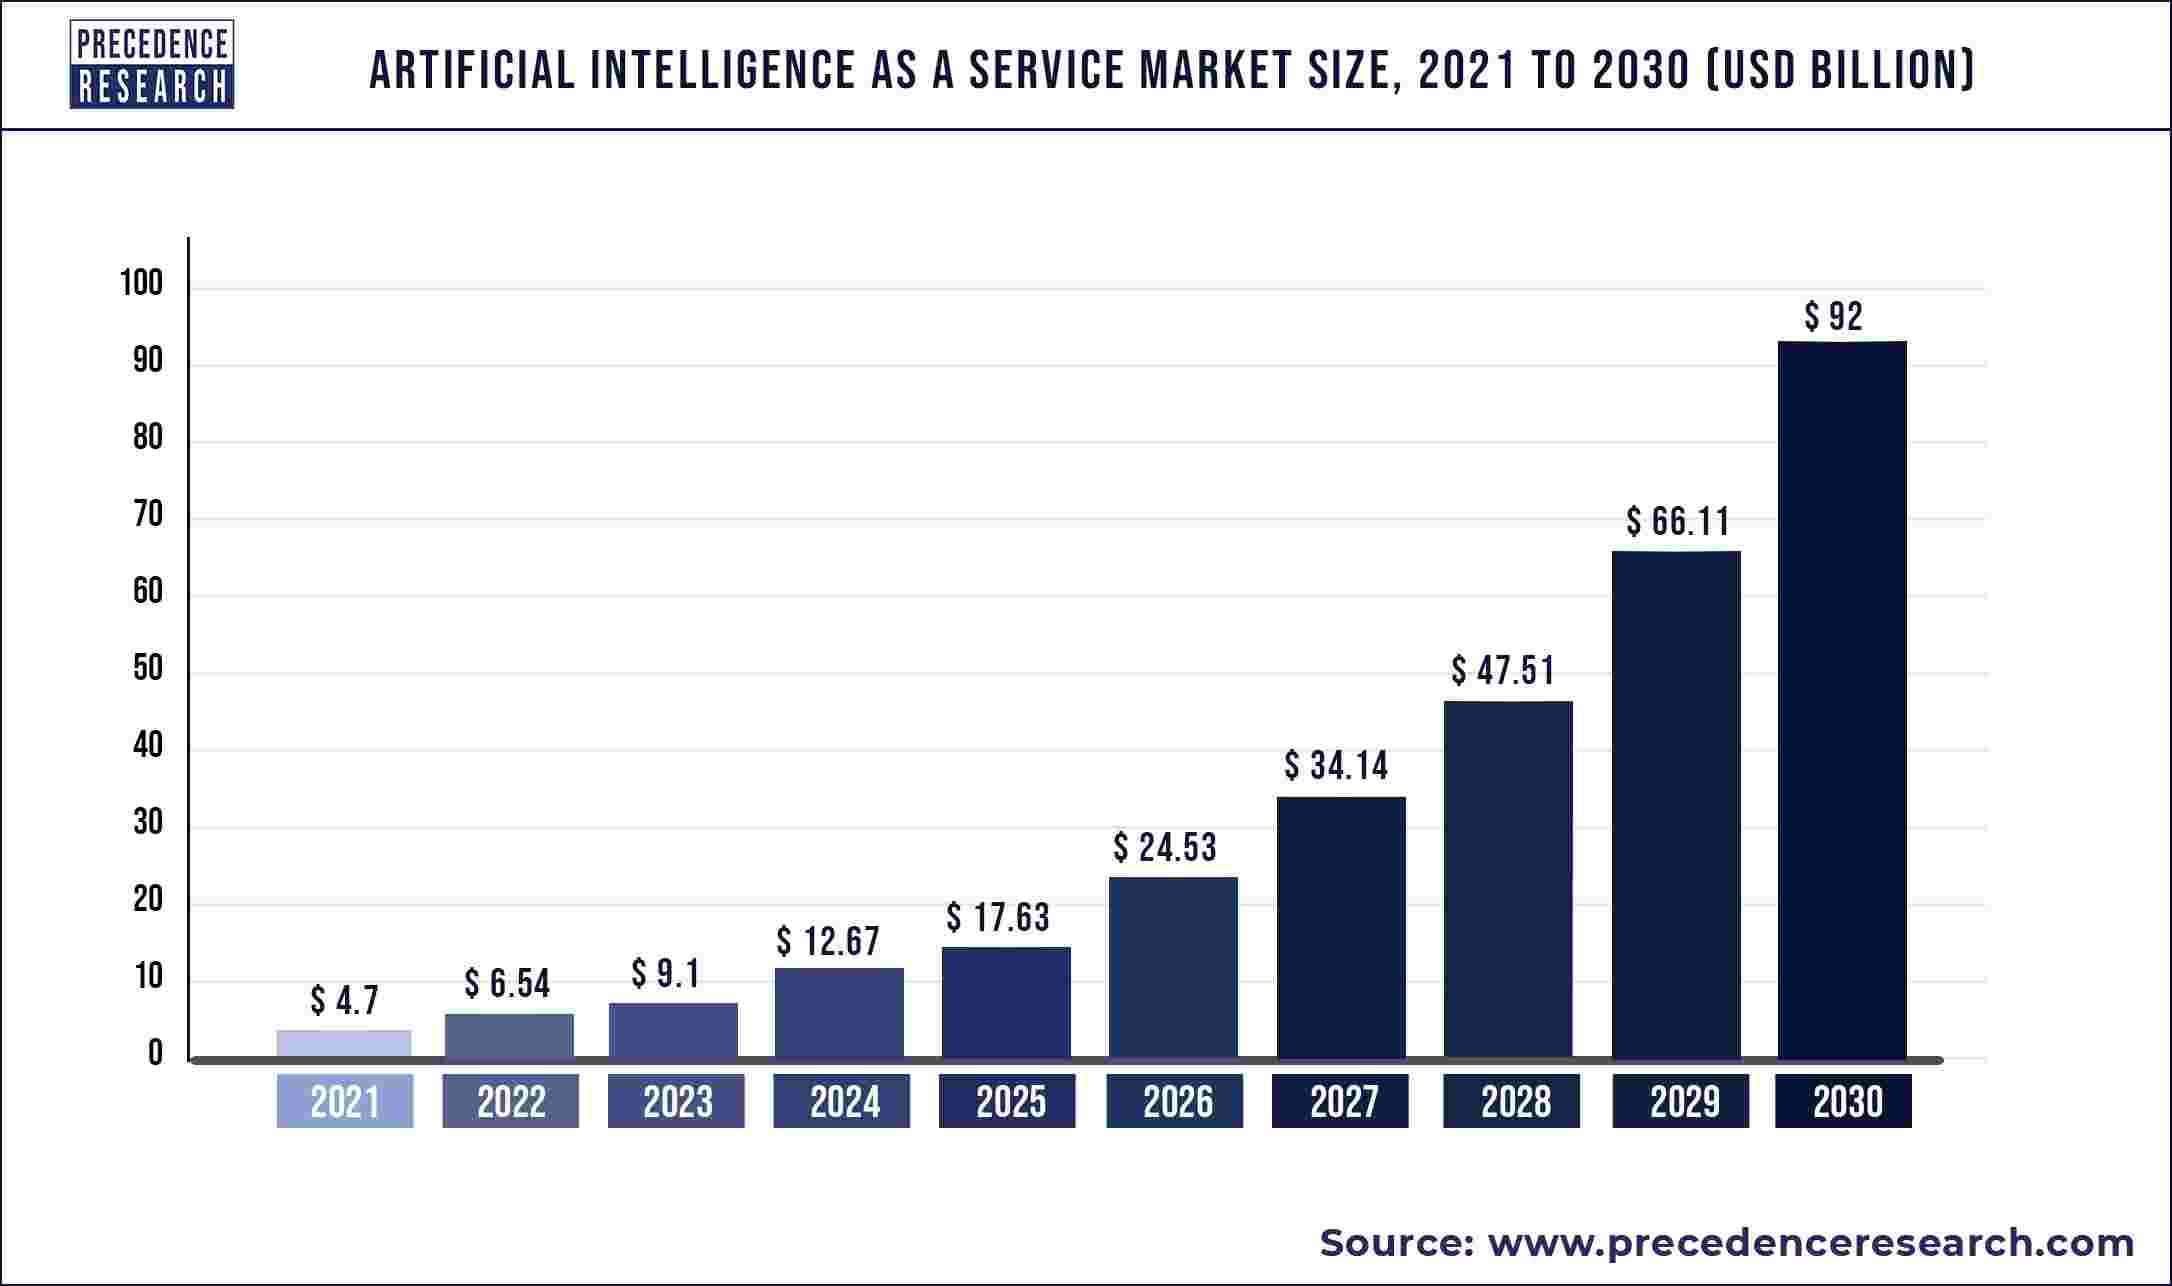 Artificial Intelligence as a Service Market Size 2022 To 2030